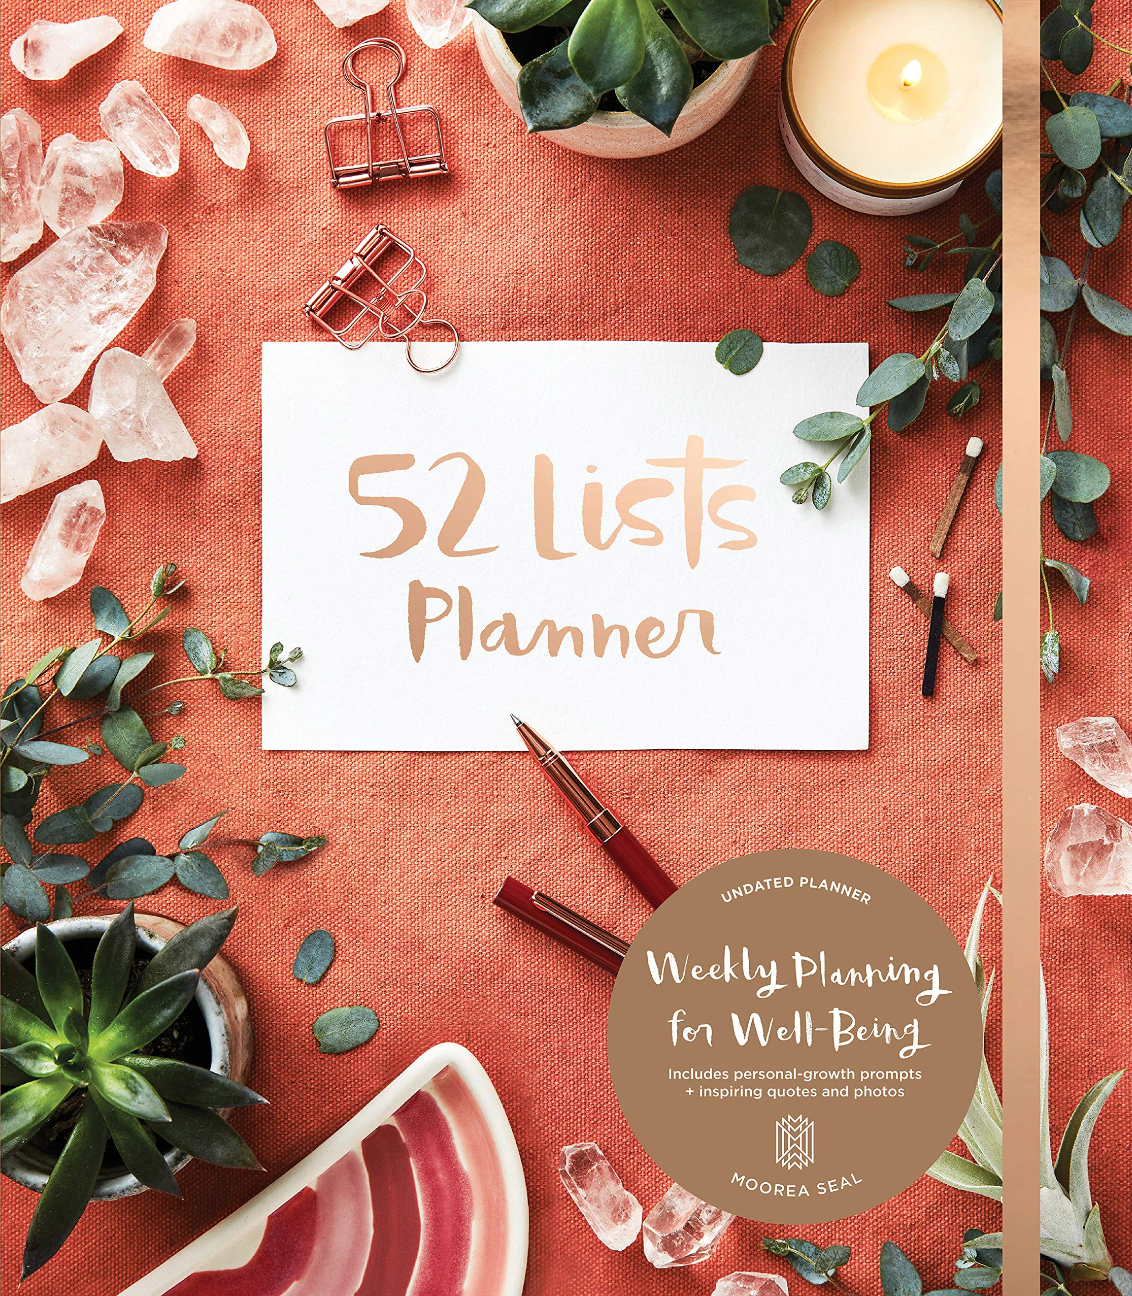 52 Lists Planner Undated 12-month Monthly/Weekly Spiral Bound Planner with Pocket